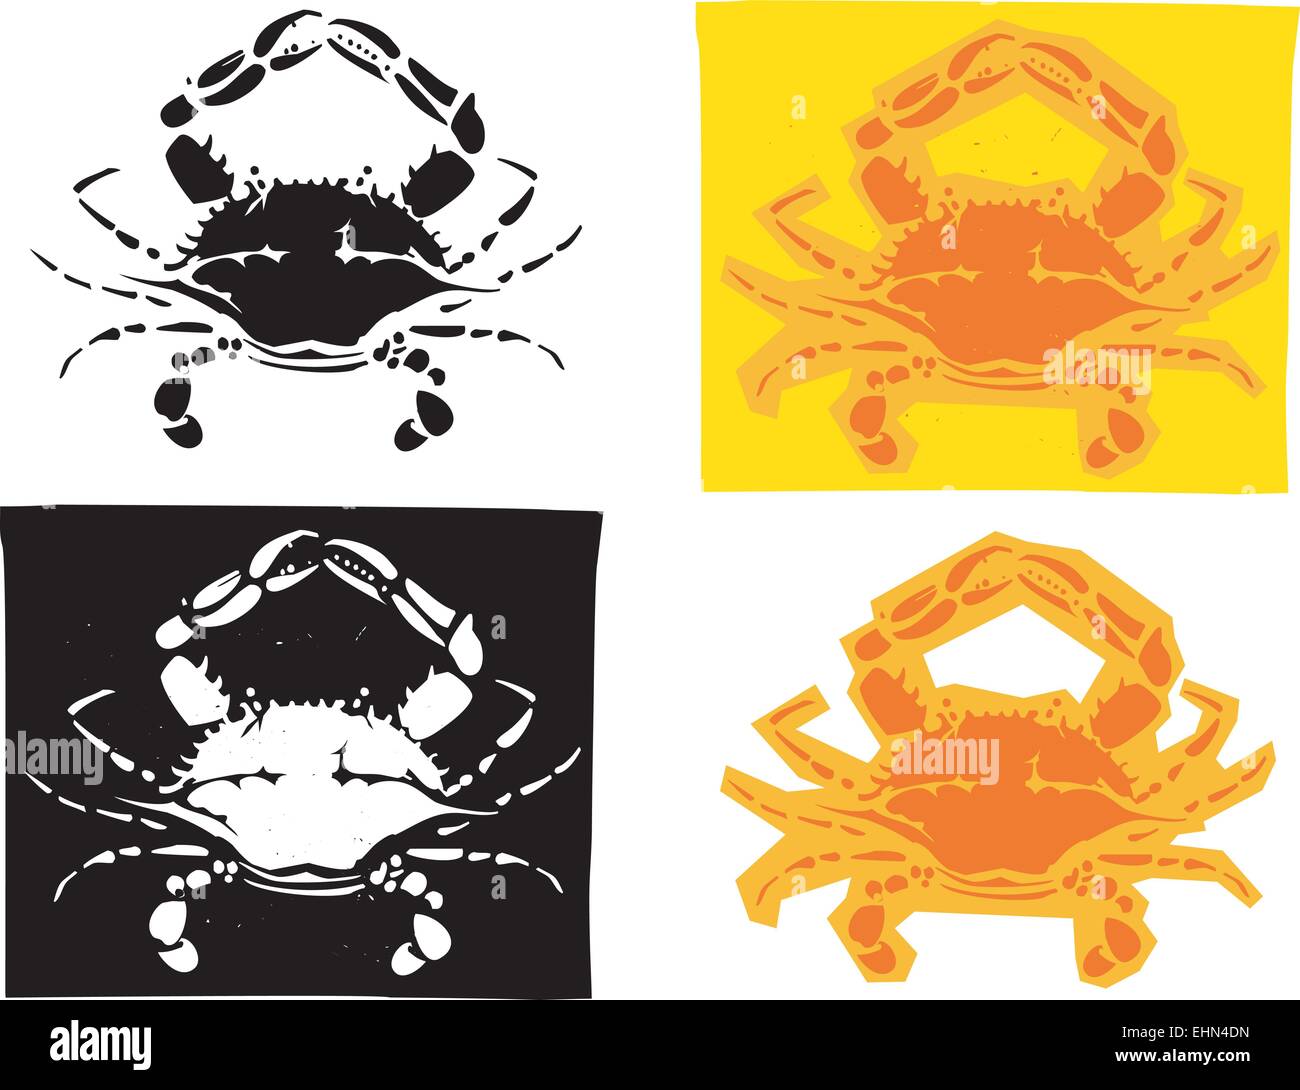 Woodcut style image of Maryland Atlantic blue crabs in different versions. Stock Vector